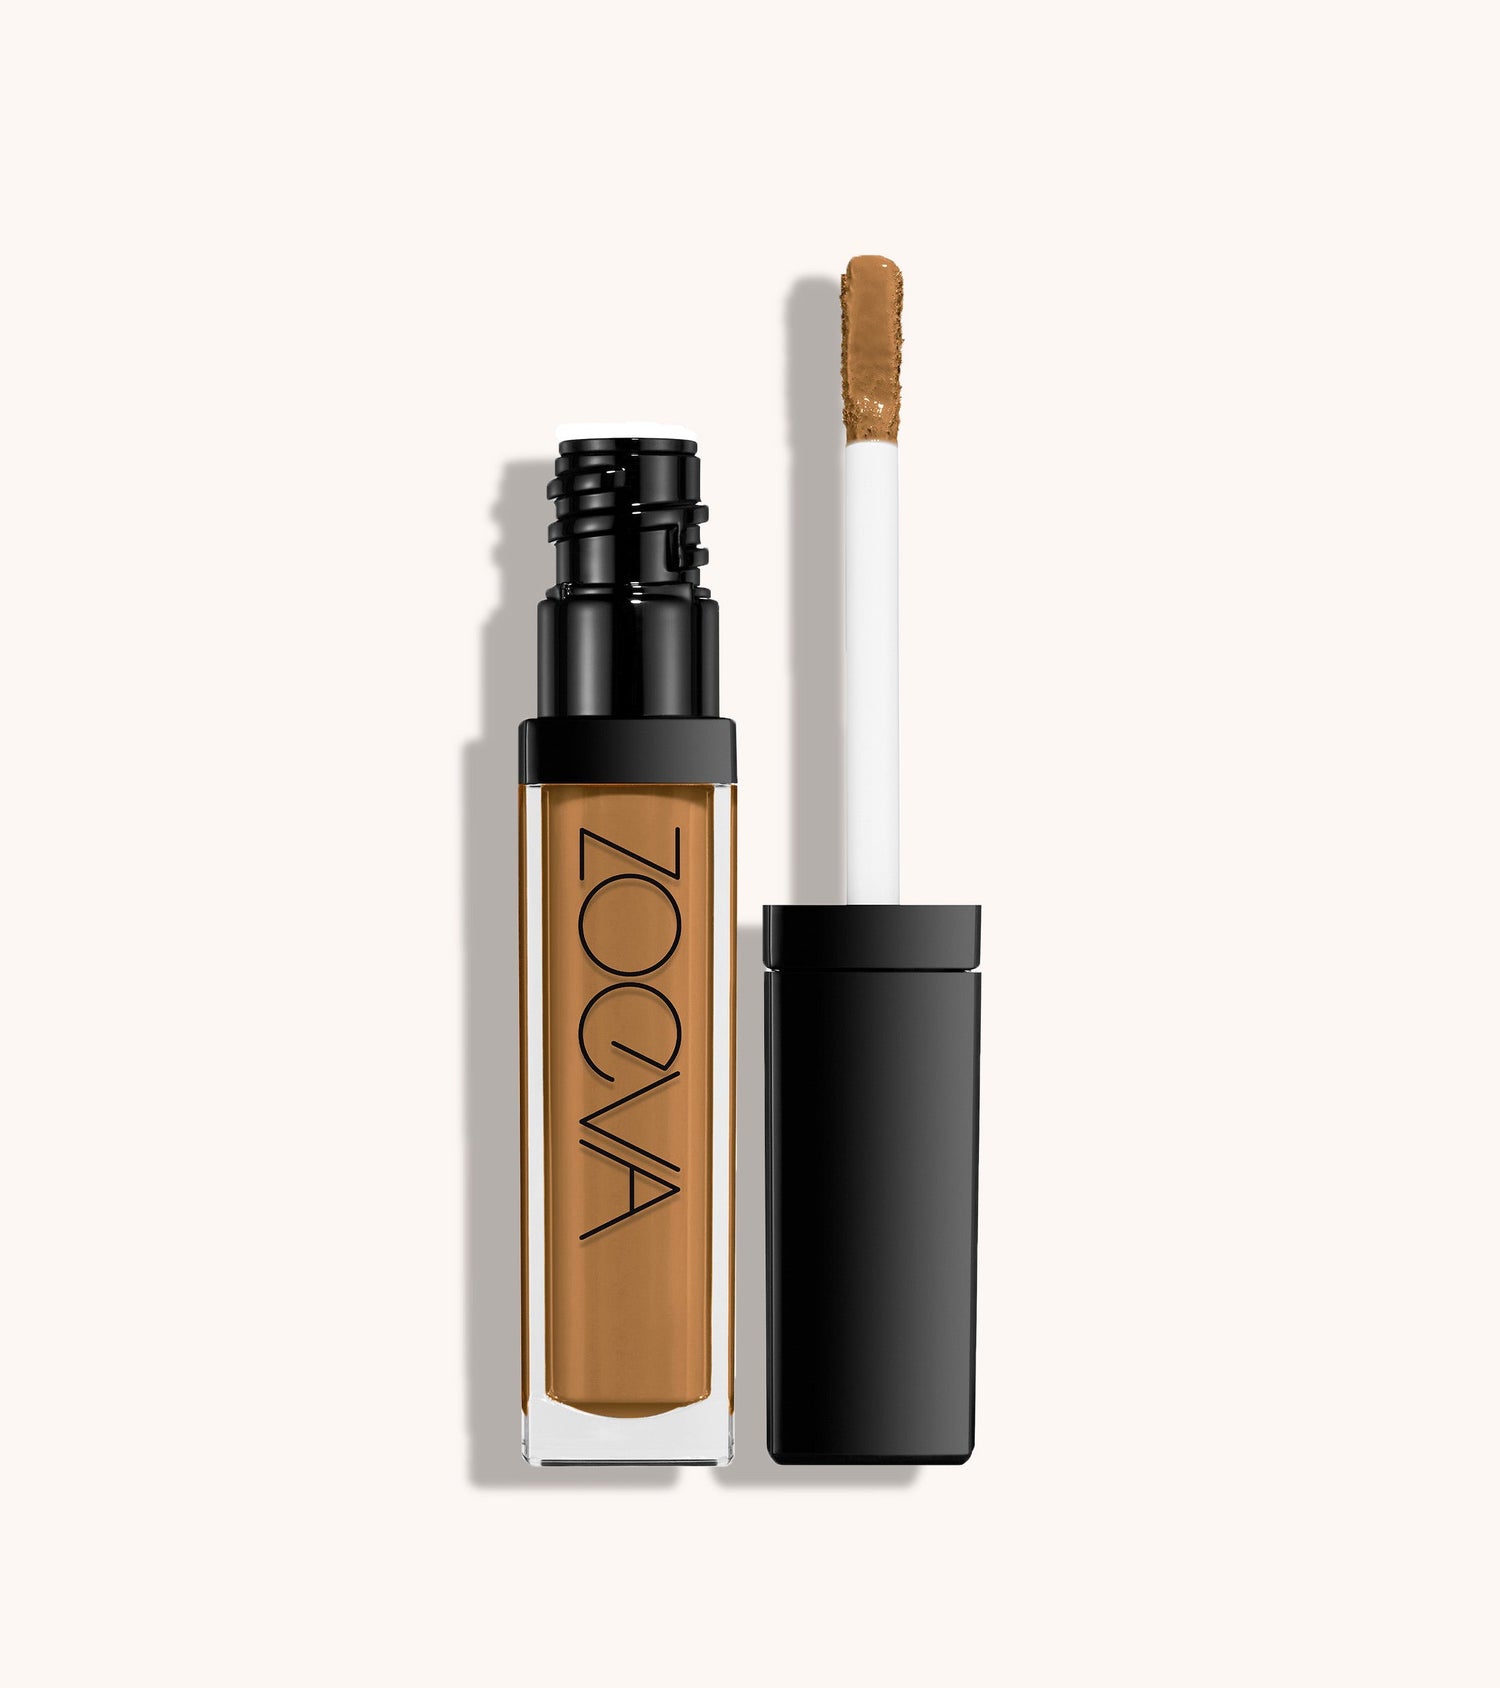 Authentik Skin Perfector Concealer (230 Reliable) Main Image featured